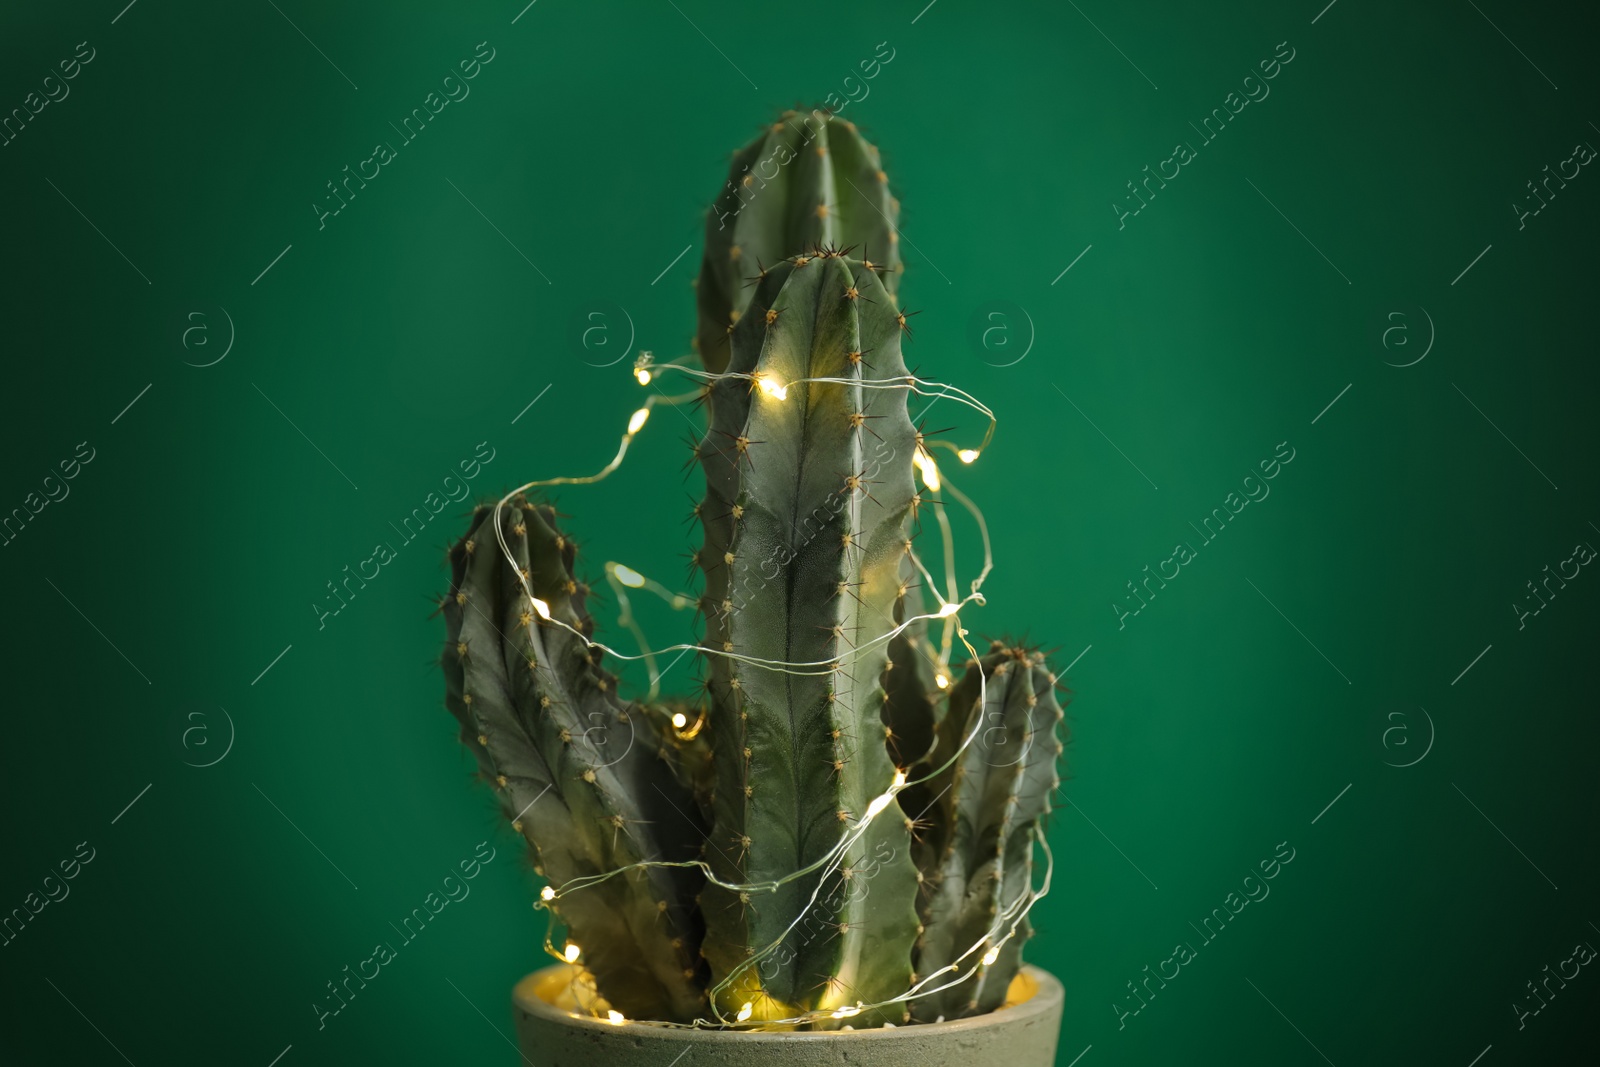 Photo of Cactus decorated with glowing fairy lights on green background, closeup